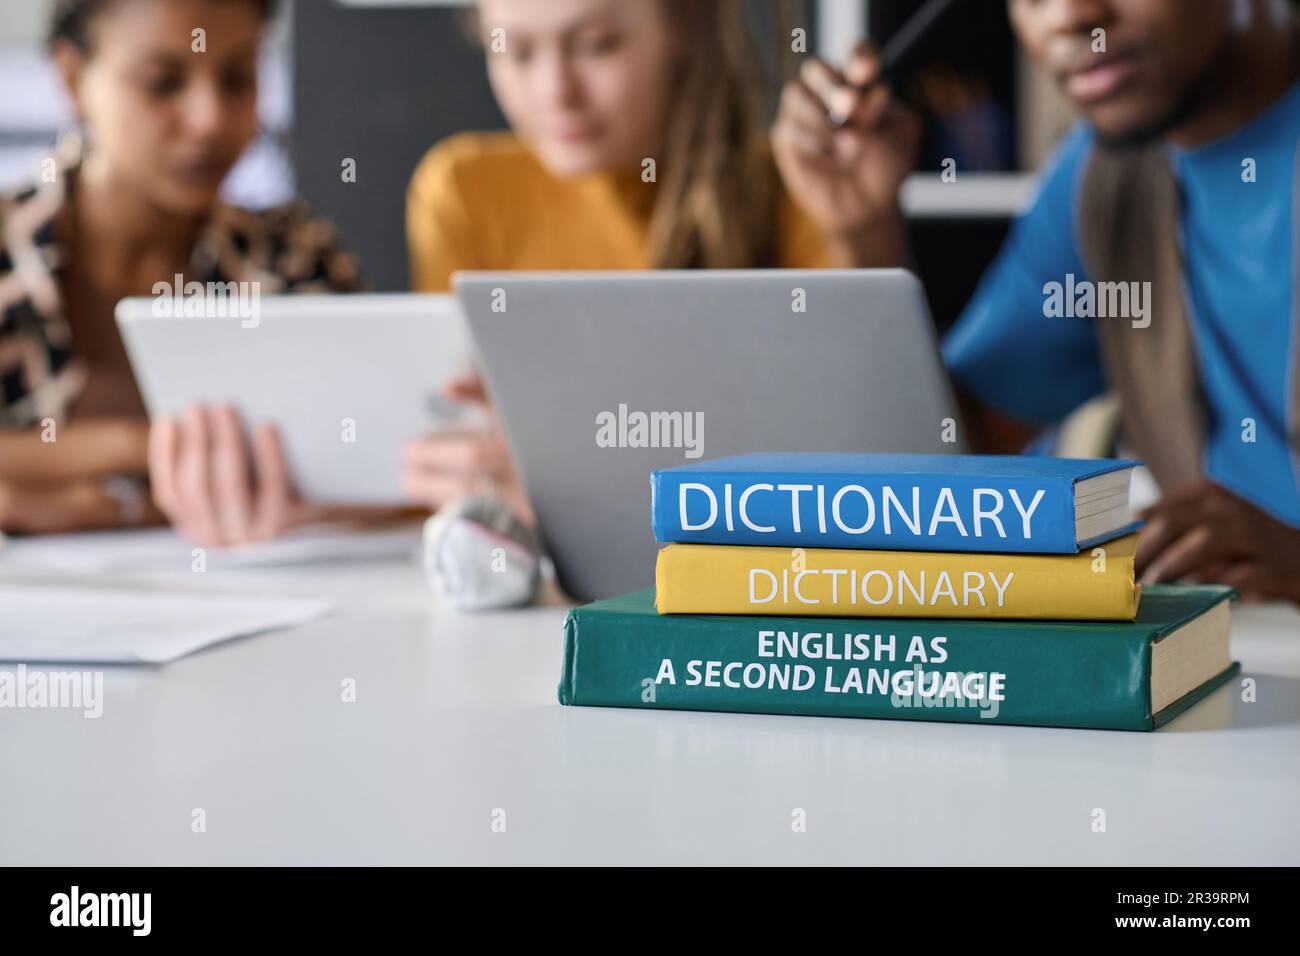 Close-up of stacks of books lying on table with students studying foreign language in background Stock Photo